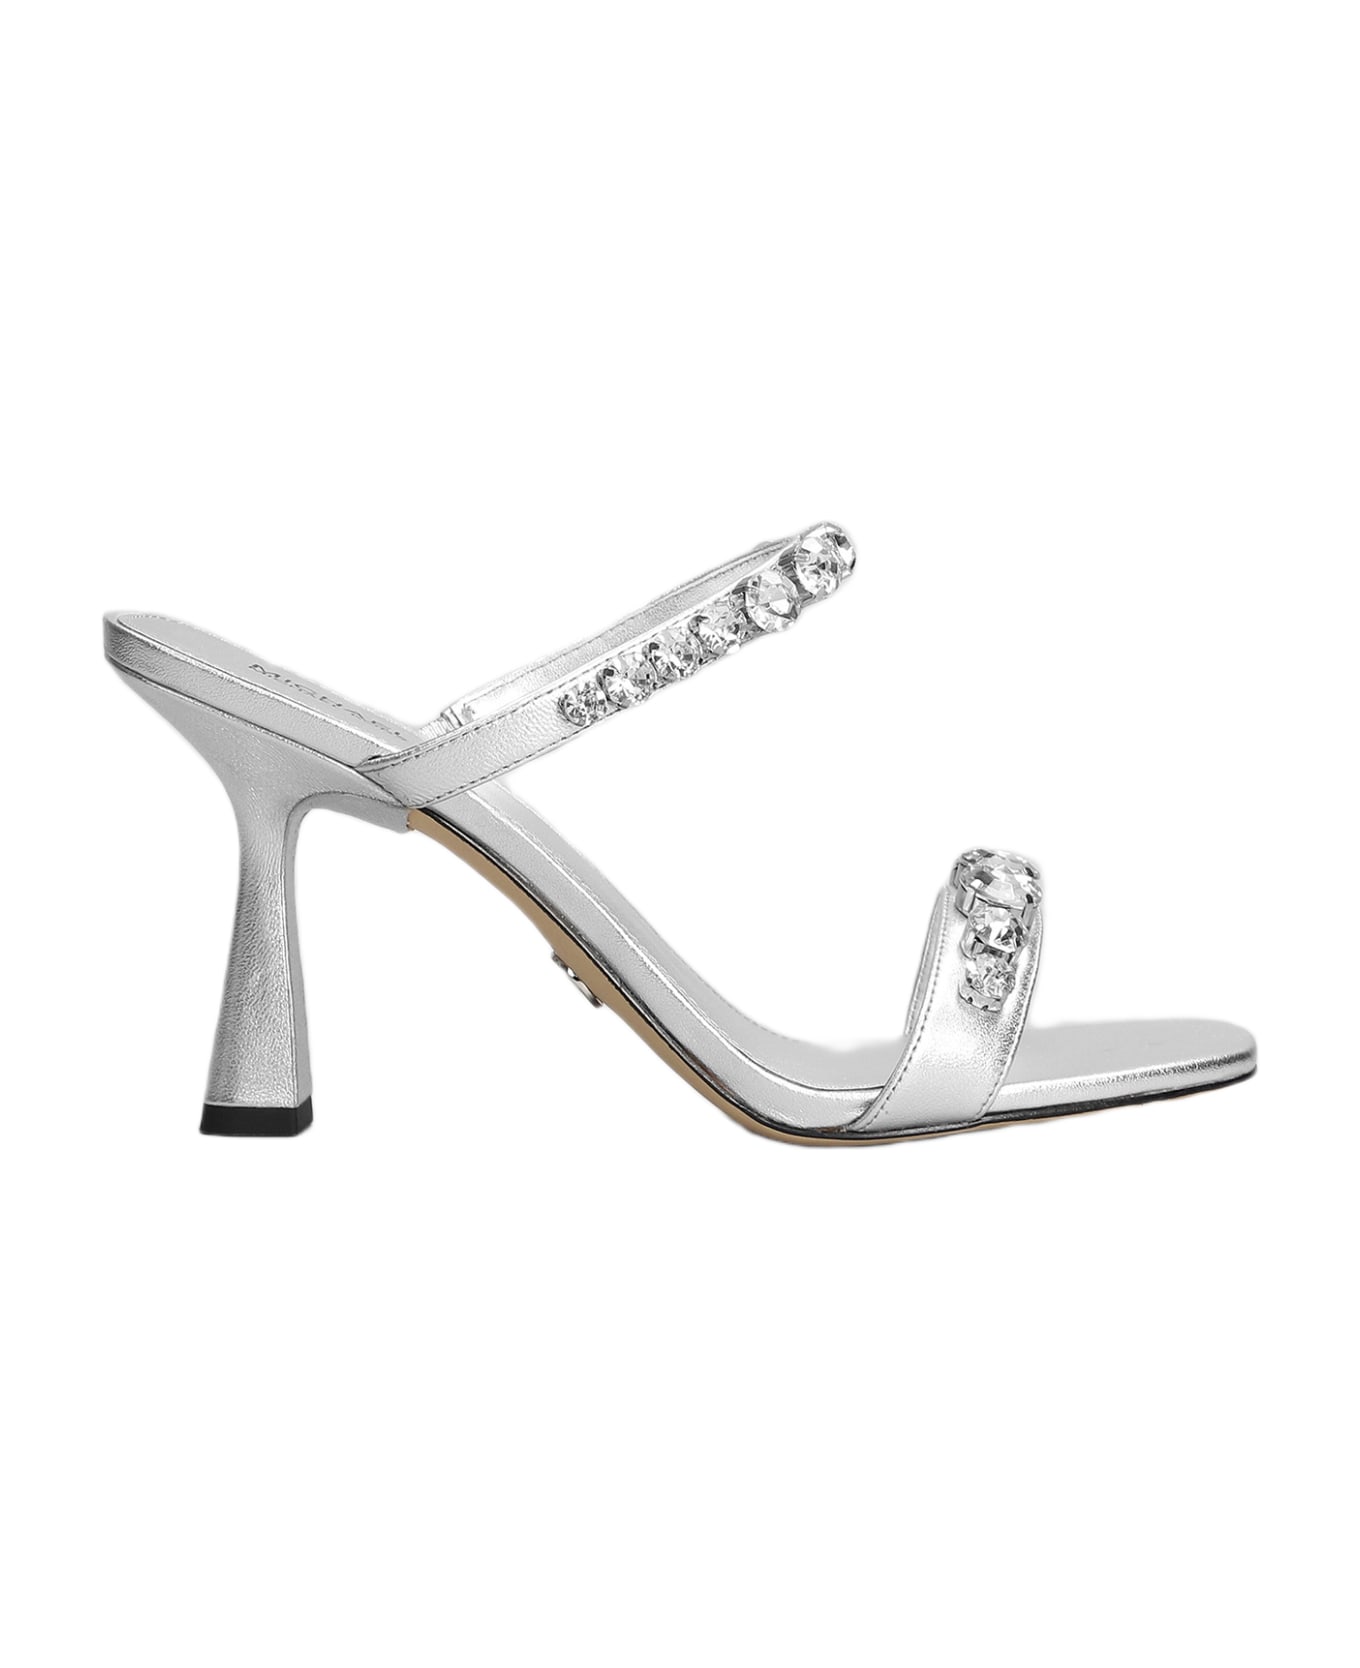 Michael Kors Clara Sandals In Silver Leather - Argento サンダル